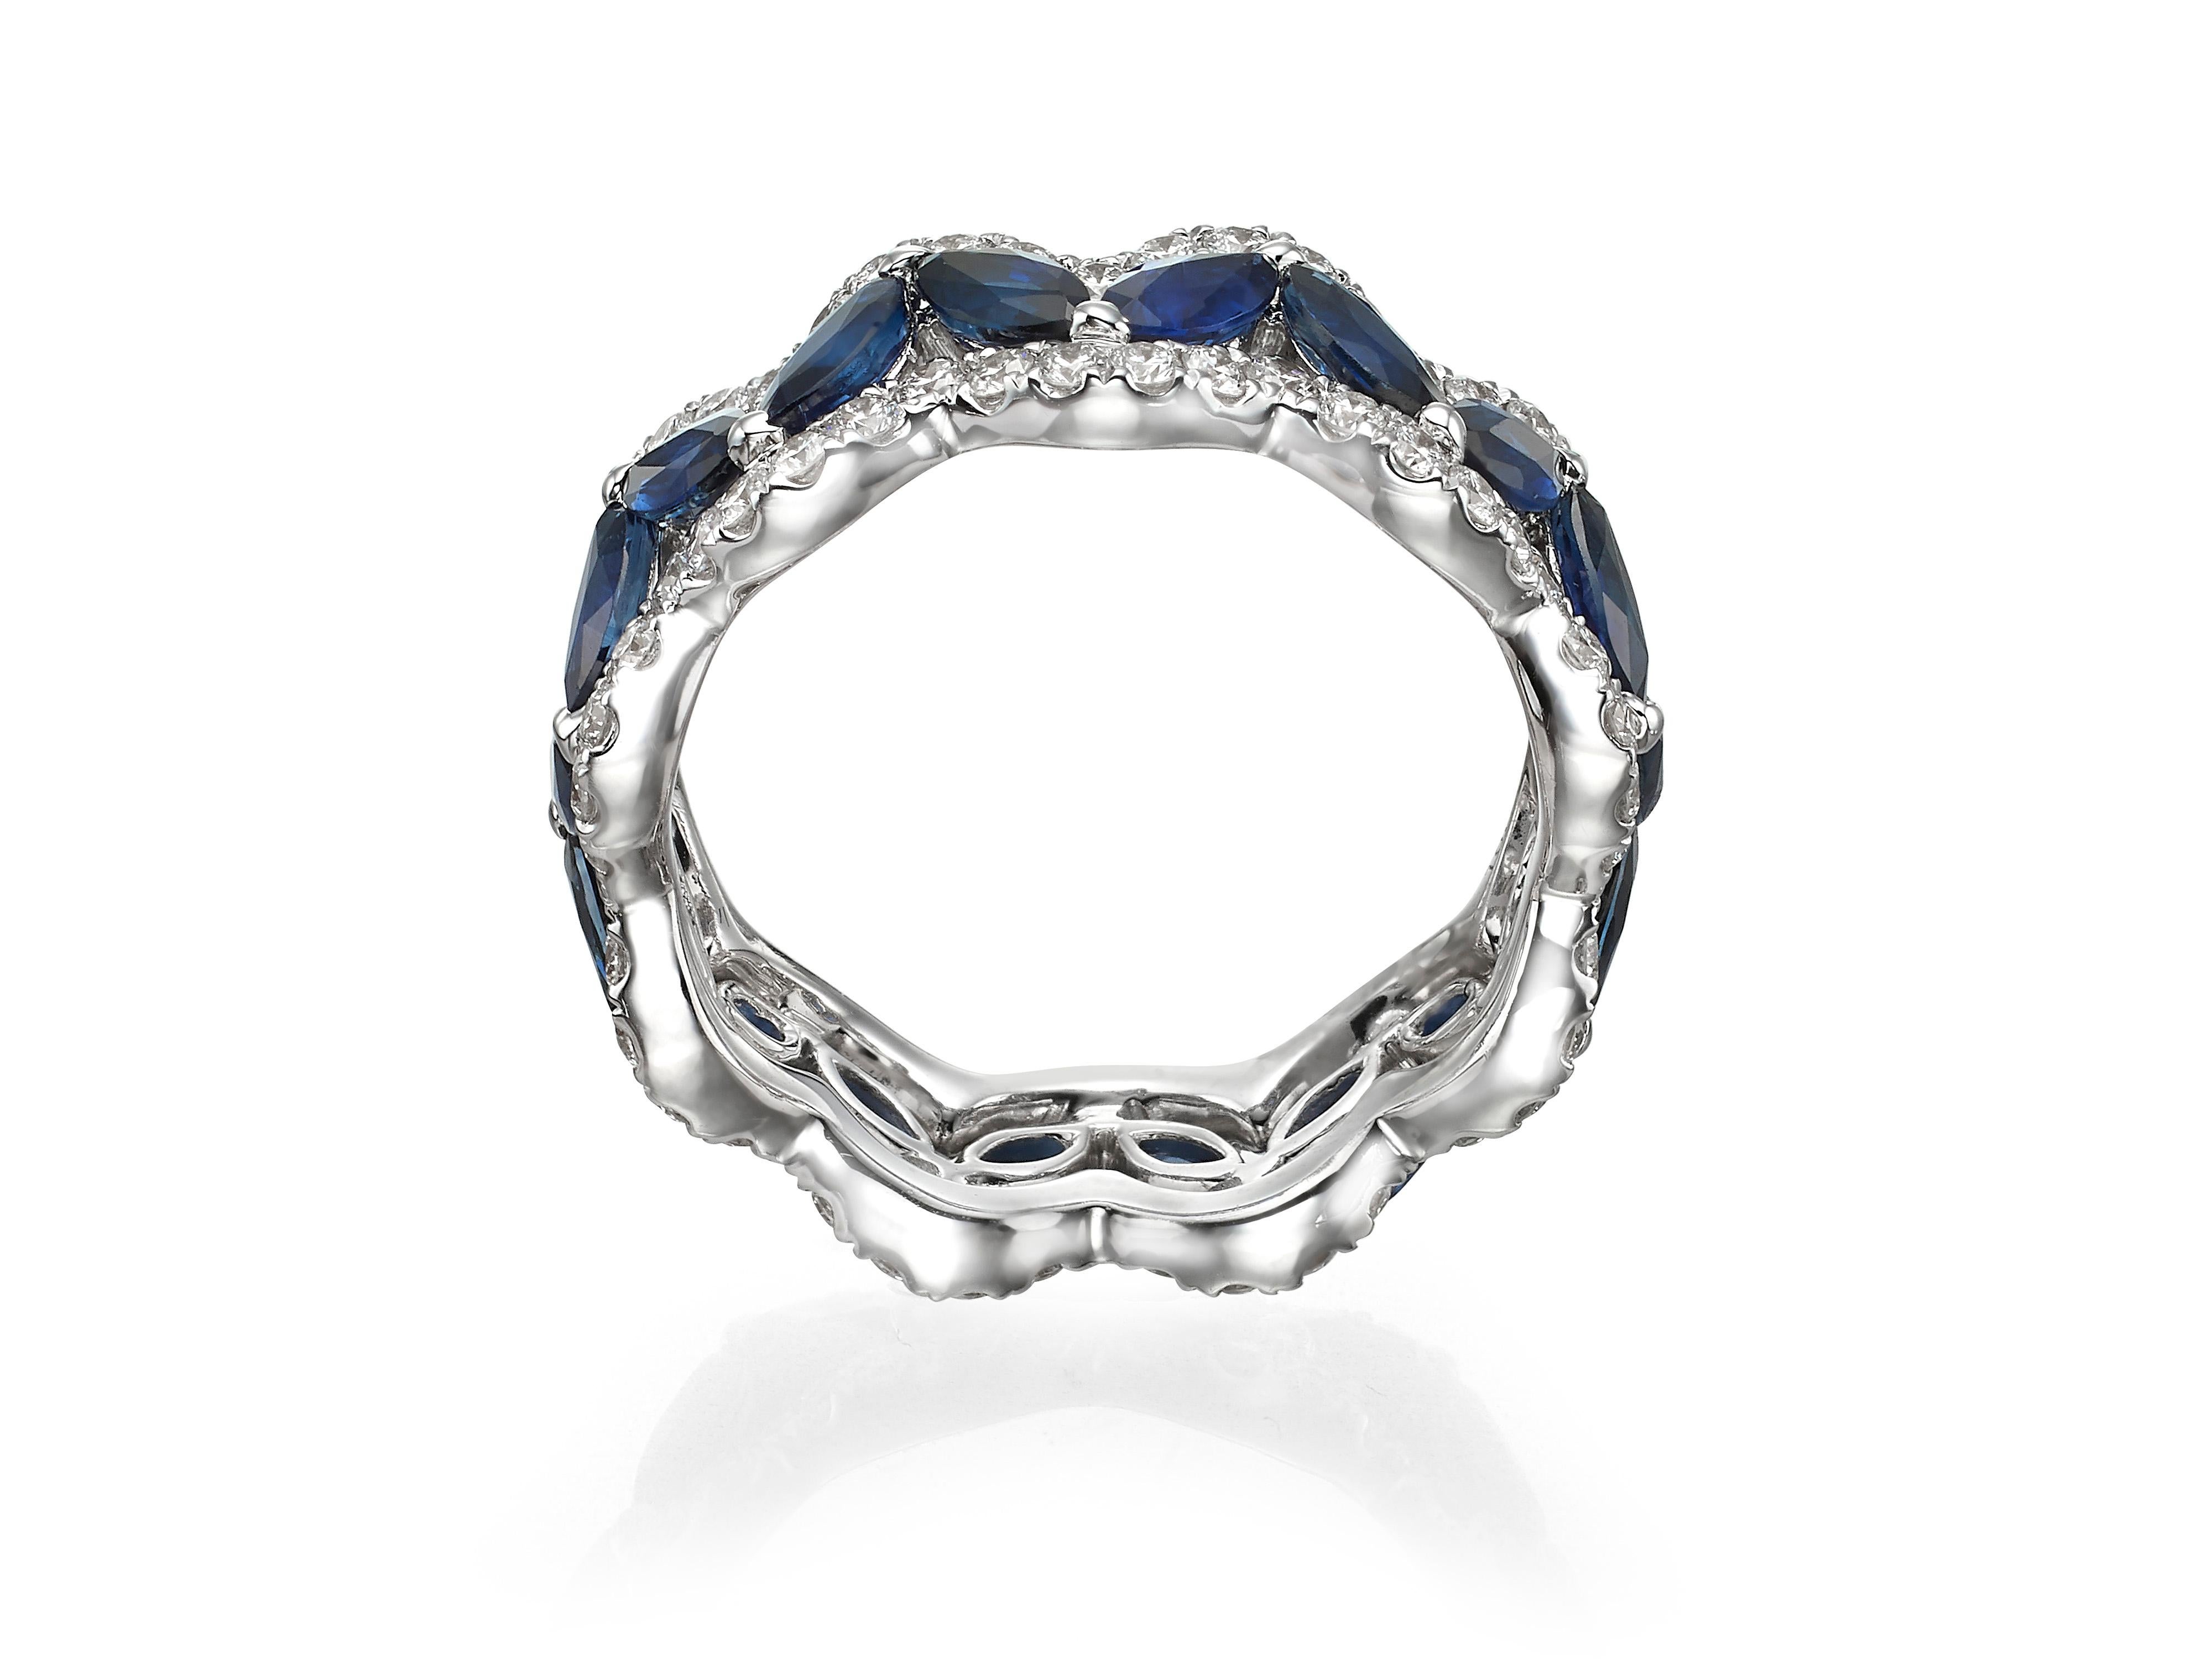 Handmade from 18K white gold, encrusted with 3.69 carats of marquise-shape blue sapphires and 1.17 carats of round brilliant cut diamonds.  Perfectly complements the Butani Round and Marquise-shape Sapphire Diamond 18K White Gold Bracelet Bangle. 